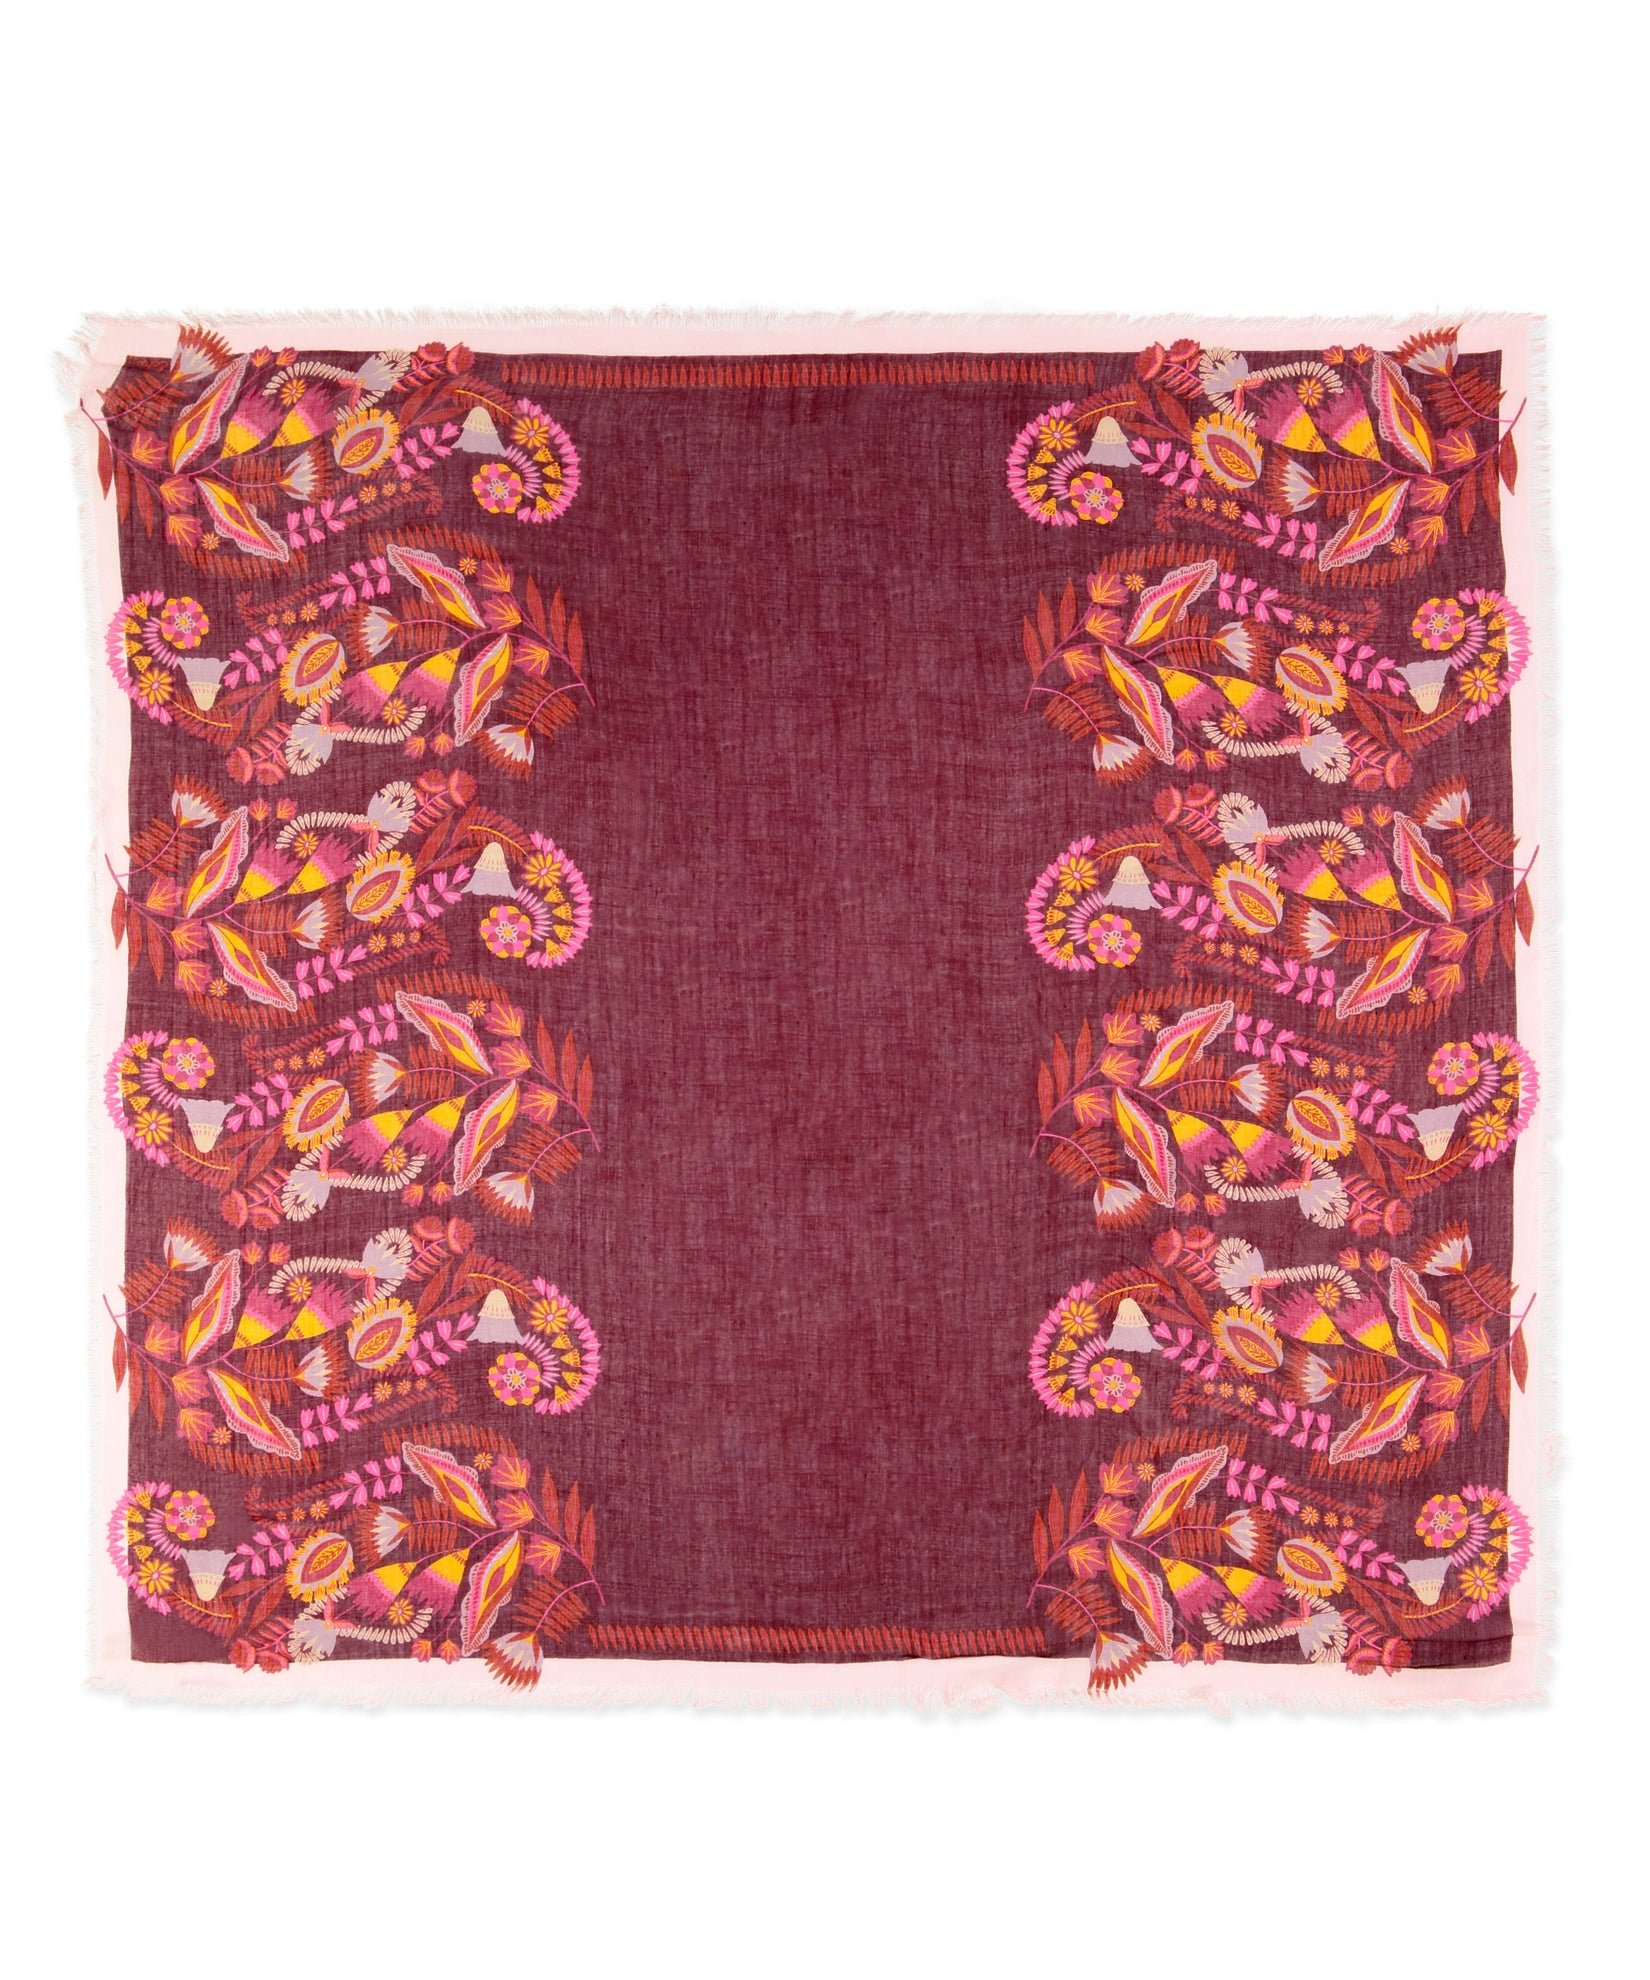 Floral Paisley Square in color Garnet